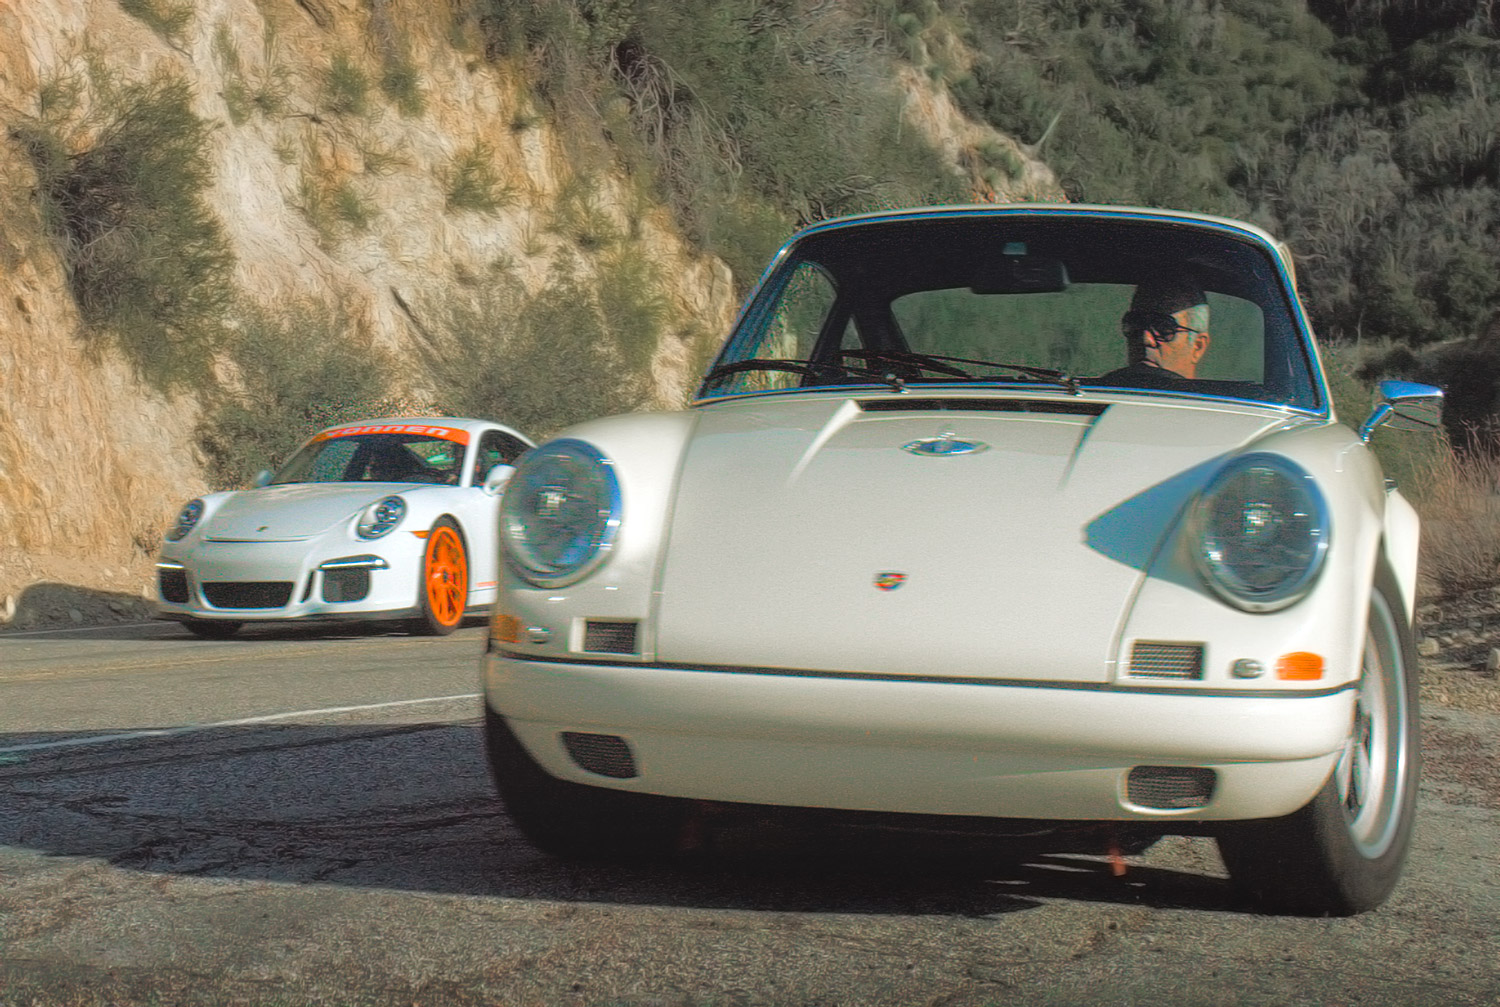 <p style='width:80%;margin:0px auto;'>In their day, classic air-cooled 911s ruled the streets. Shadow Drive enables these air-cooled legends to regain that status, even alongside modern cars.<br><a href='/advantages/' style='font-size:.75em;'>[ ADVANTAGES ]</a></p>